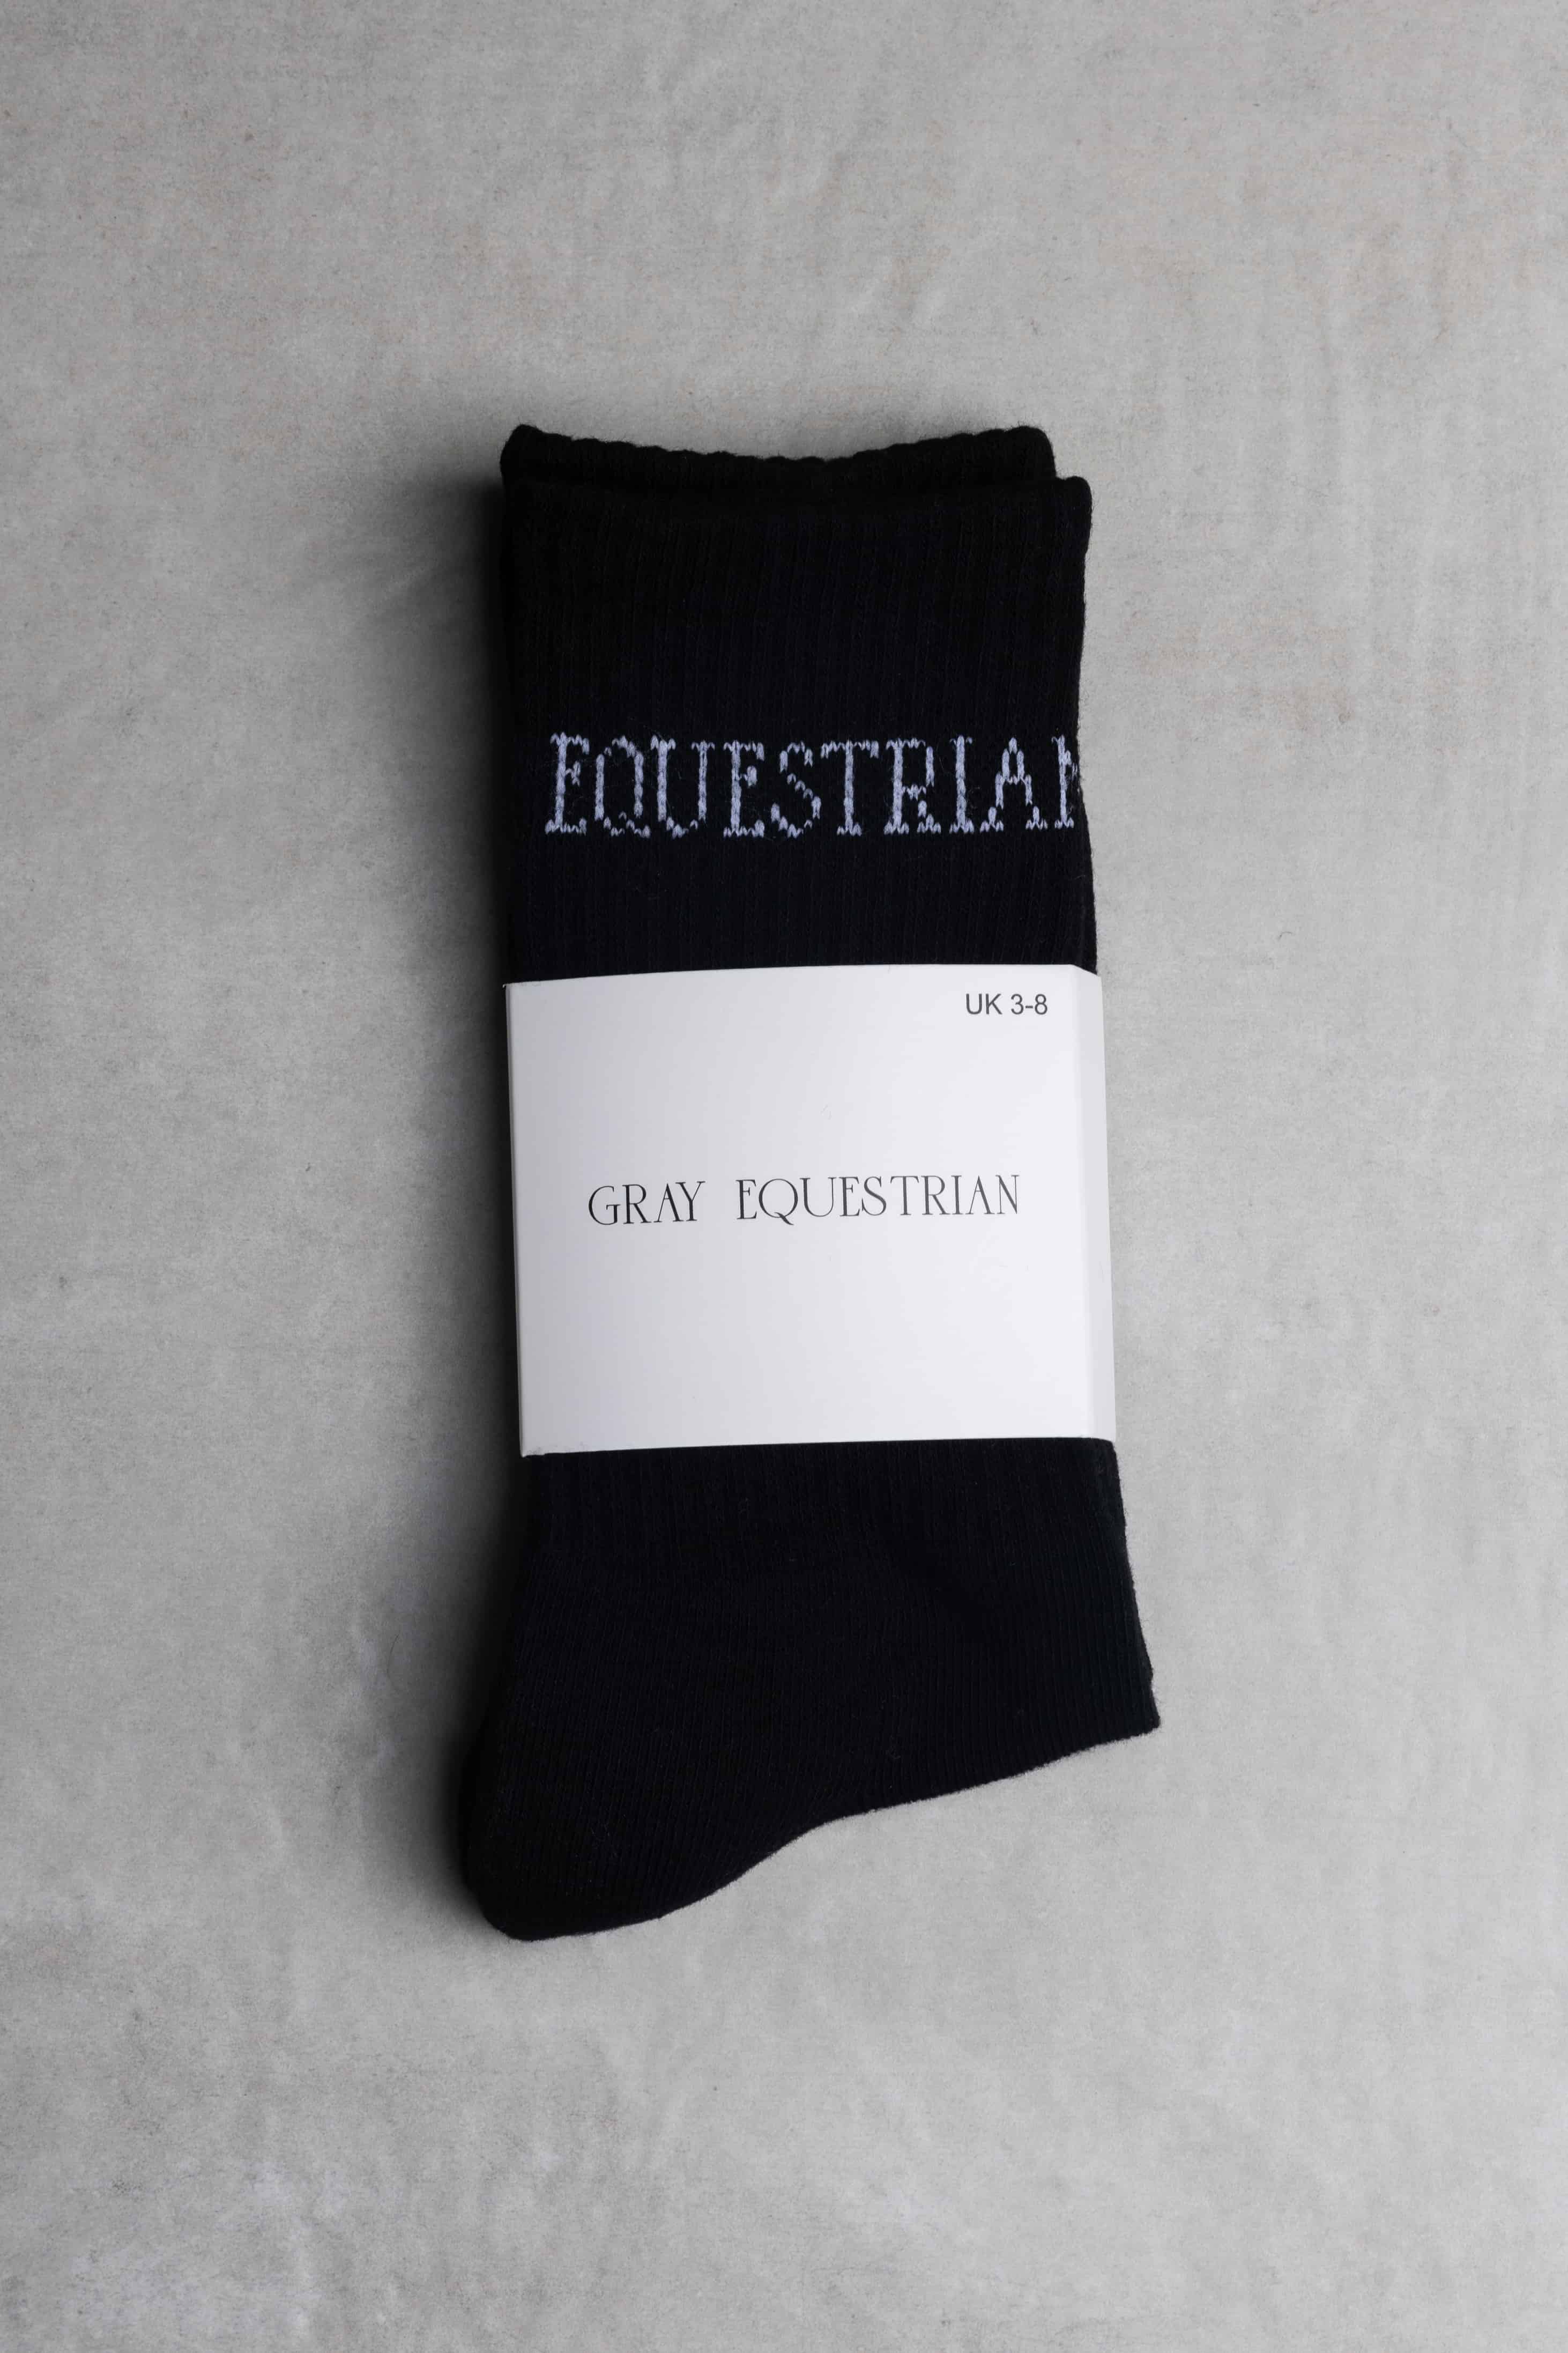 Our black riding socks with white Grey Equestrian branding.